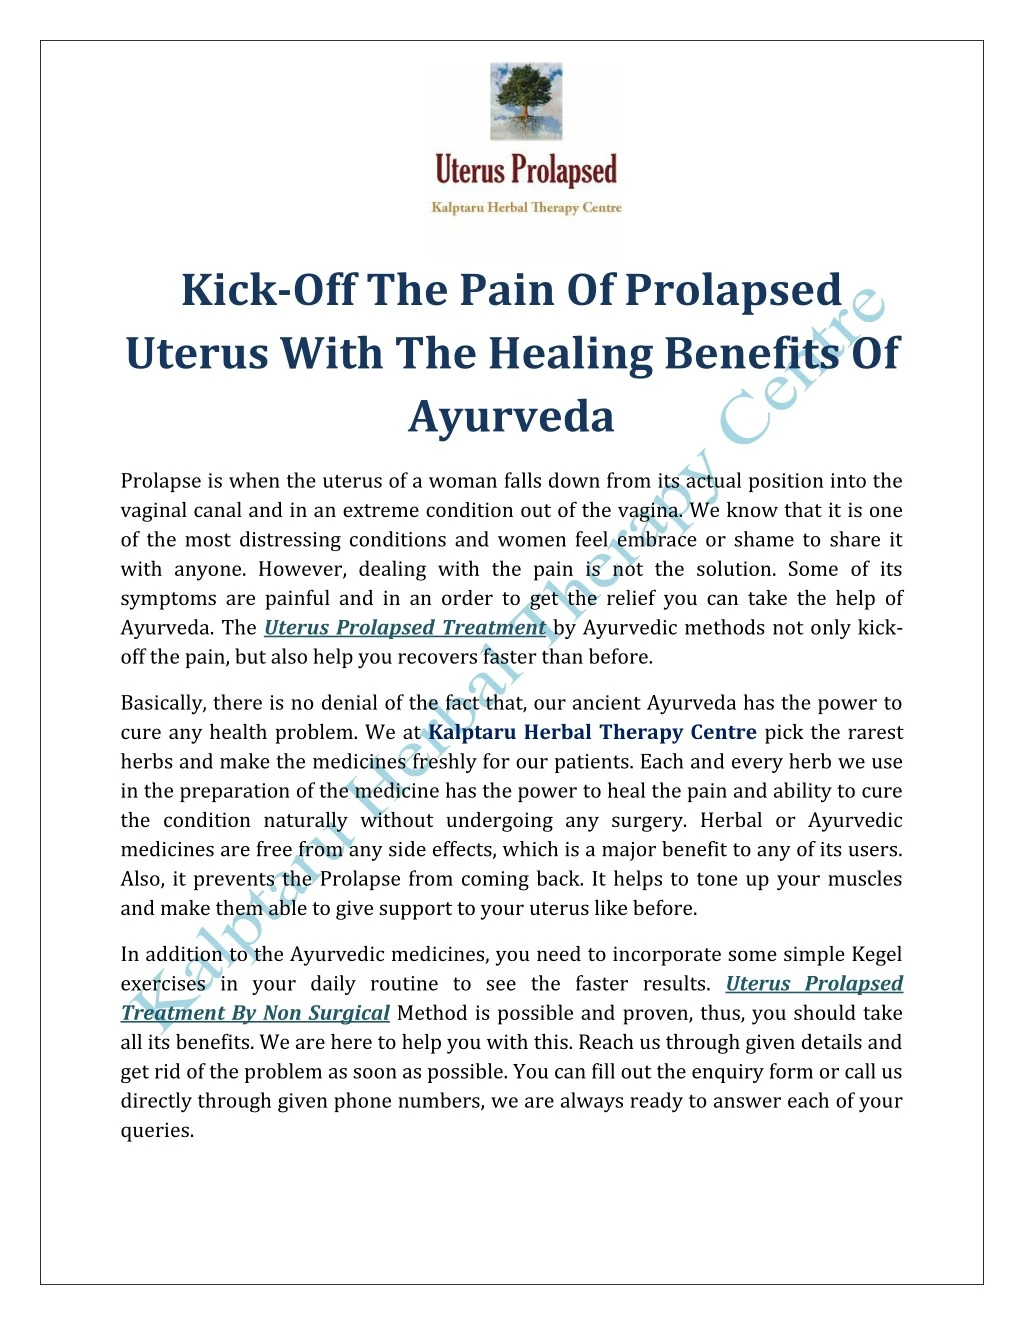 kick off the pain of prolapsed uterus with